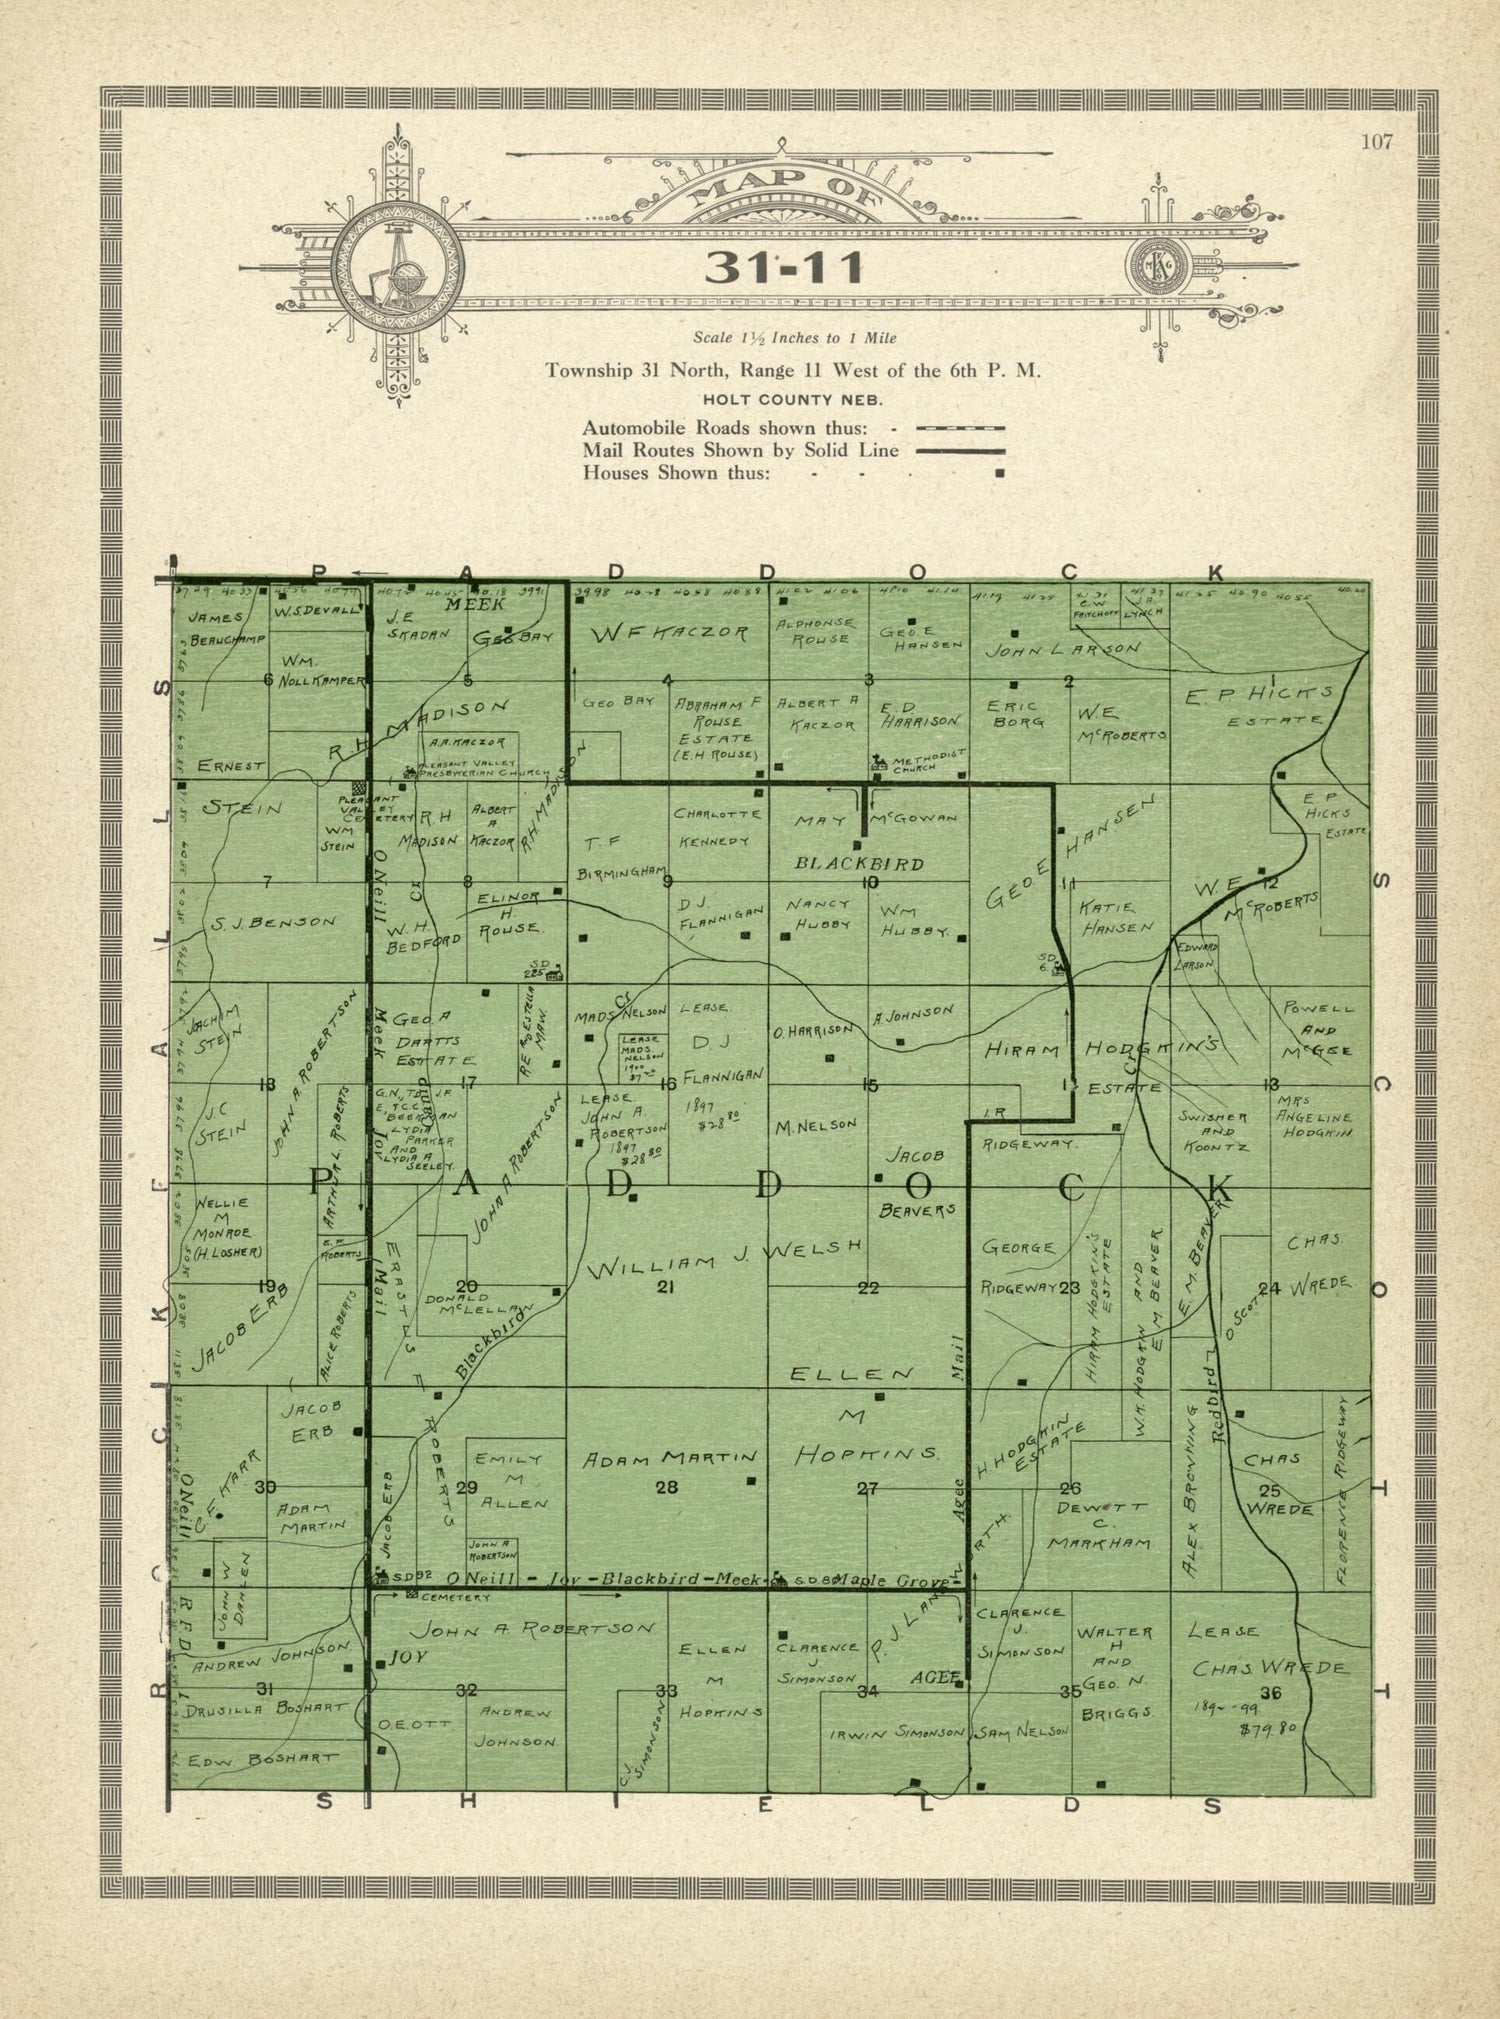 This old map of Map of 31-11 from Standard Atlas and Directory of Holt County, Nebraska from 1915 was created by Iowa) Kenyon Company (Des Moines in 1915